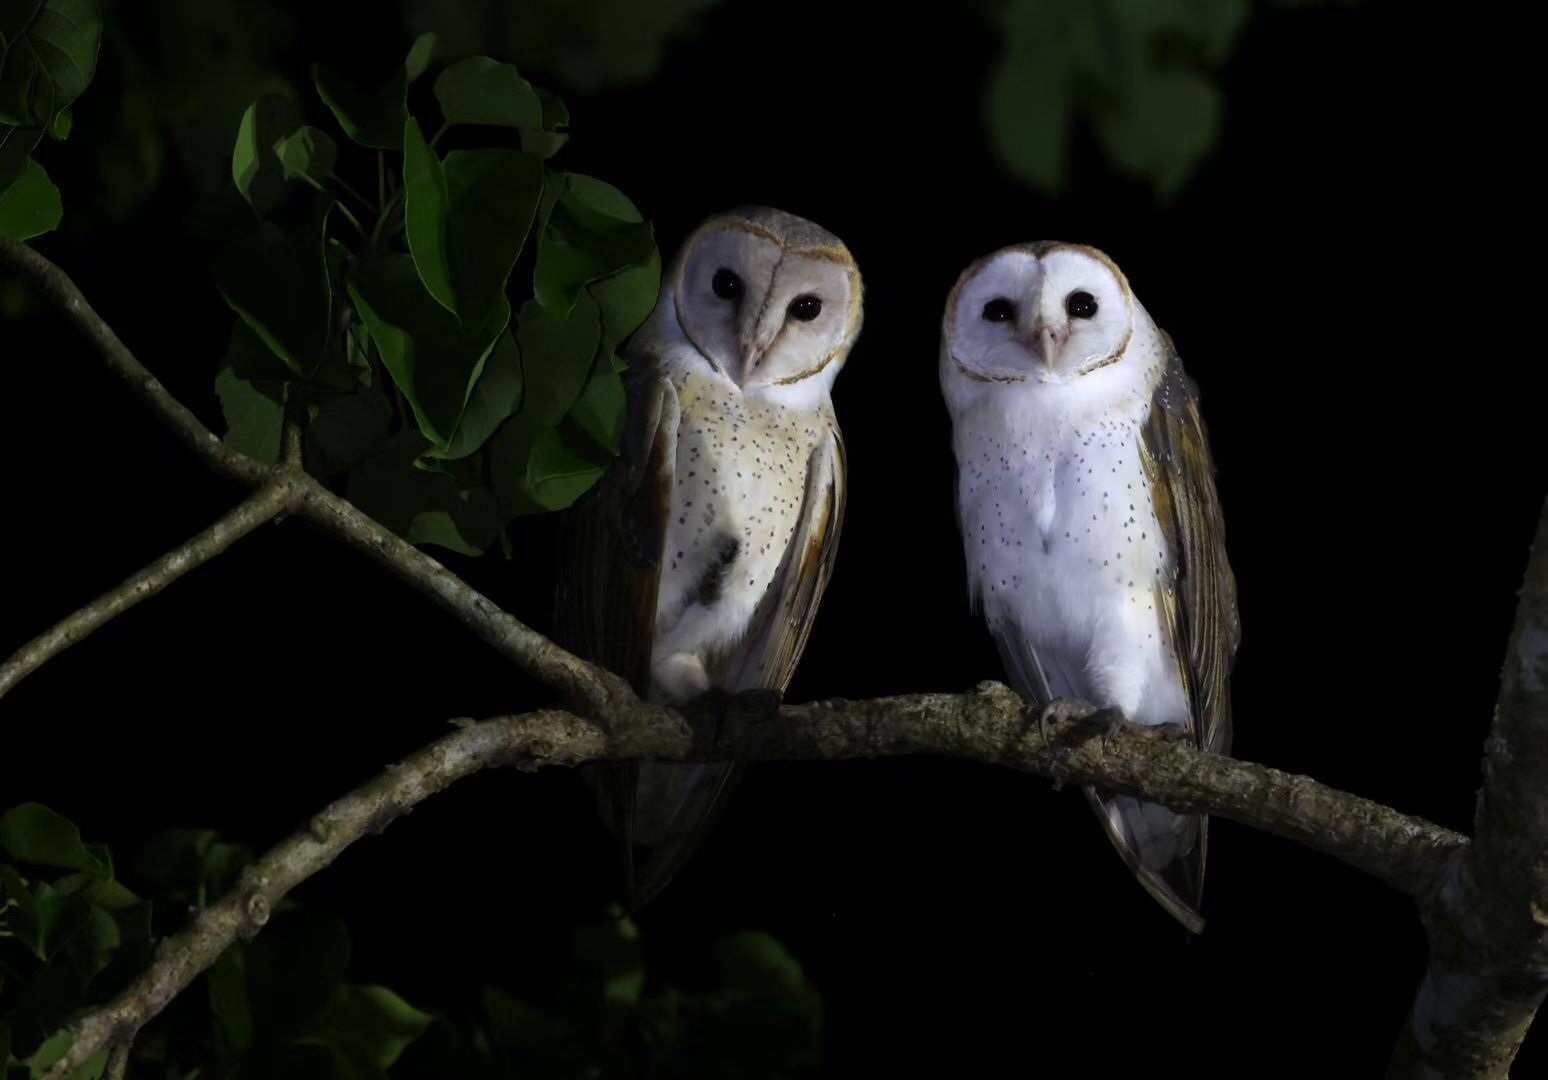 Monkey-faced owl couple finds home in SW China botanical garden